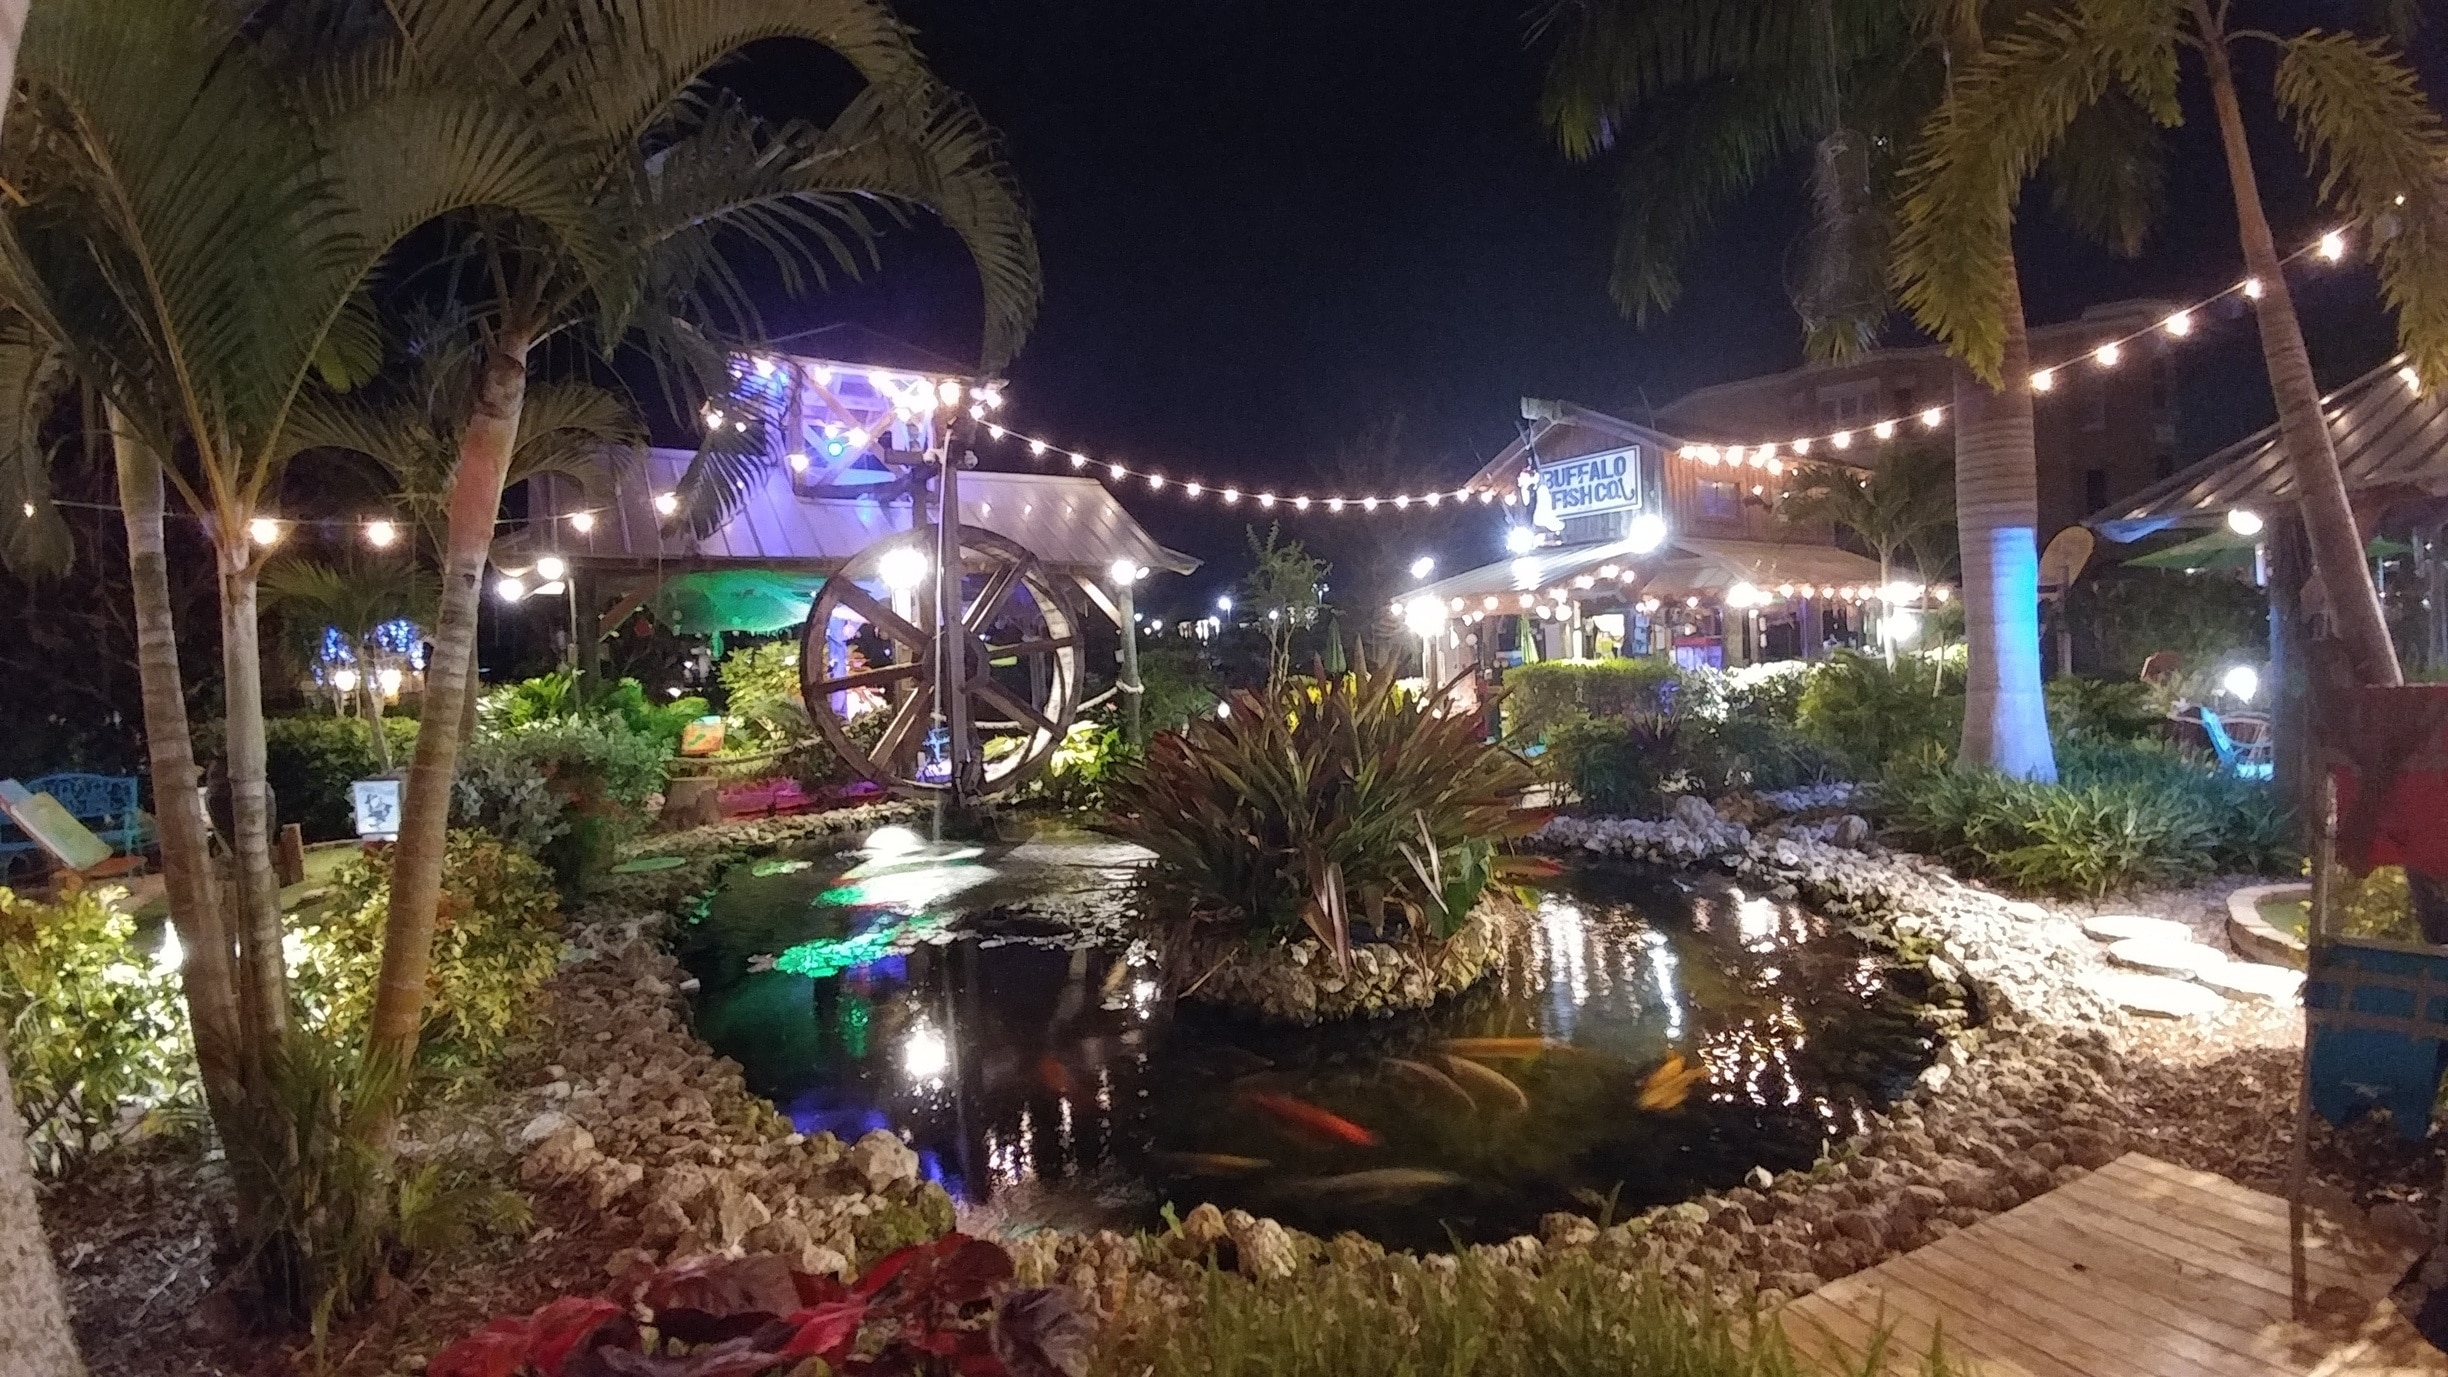 The Fish Hole at Lakewood Ranch is a fun and challenging 18 hole mini golf course with turtles, koi and informational signs about tropical plants and ocean fish.